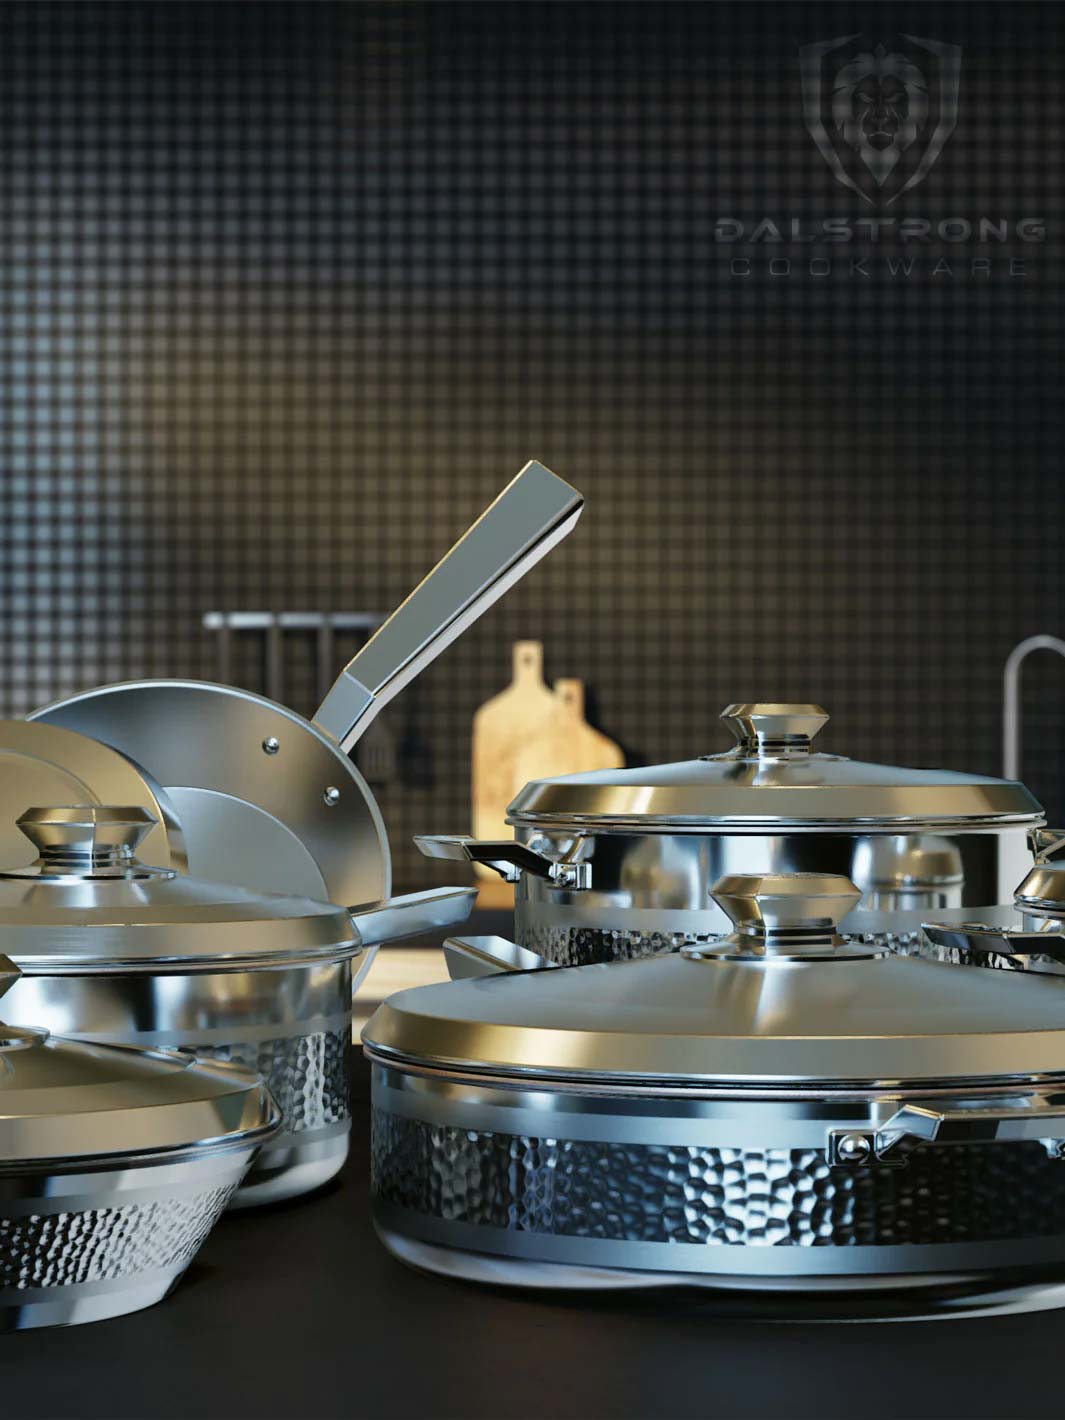 Dalstrong avalon series 12 piece cookware set silver on a kitchen table.